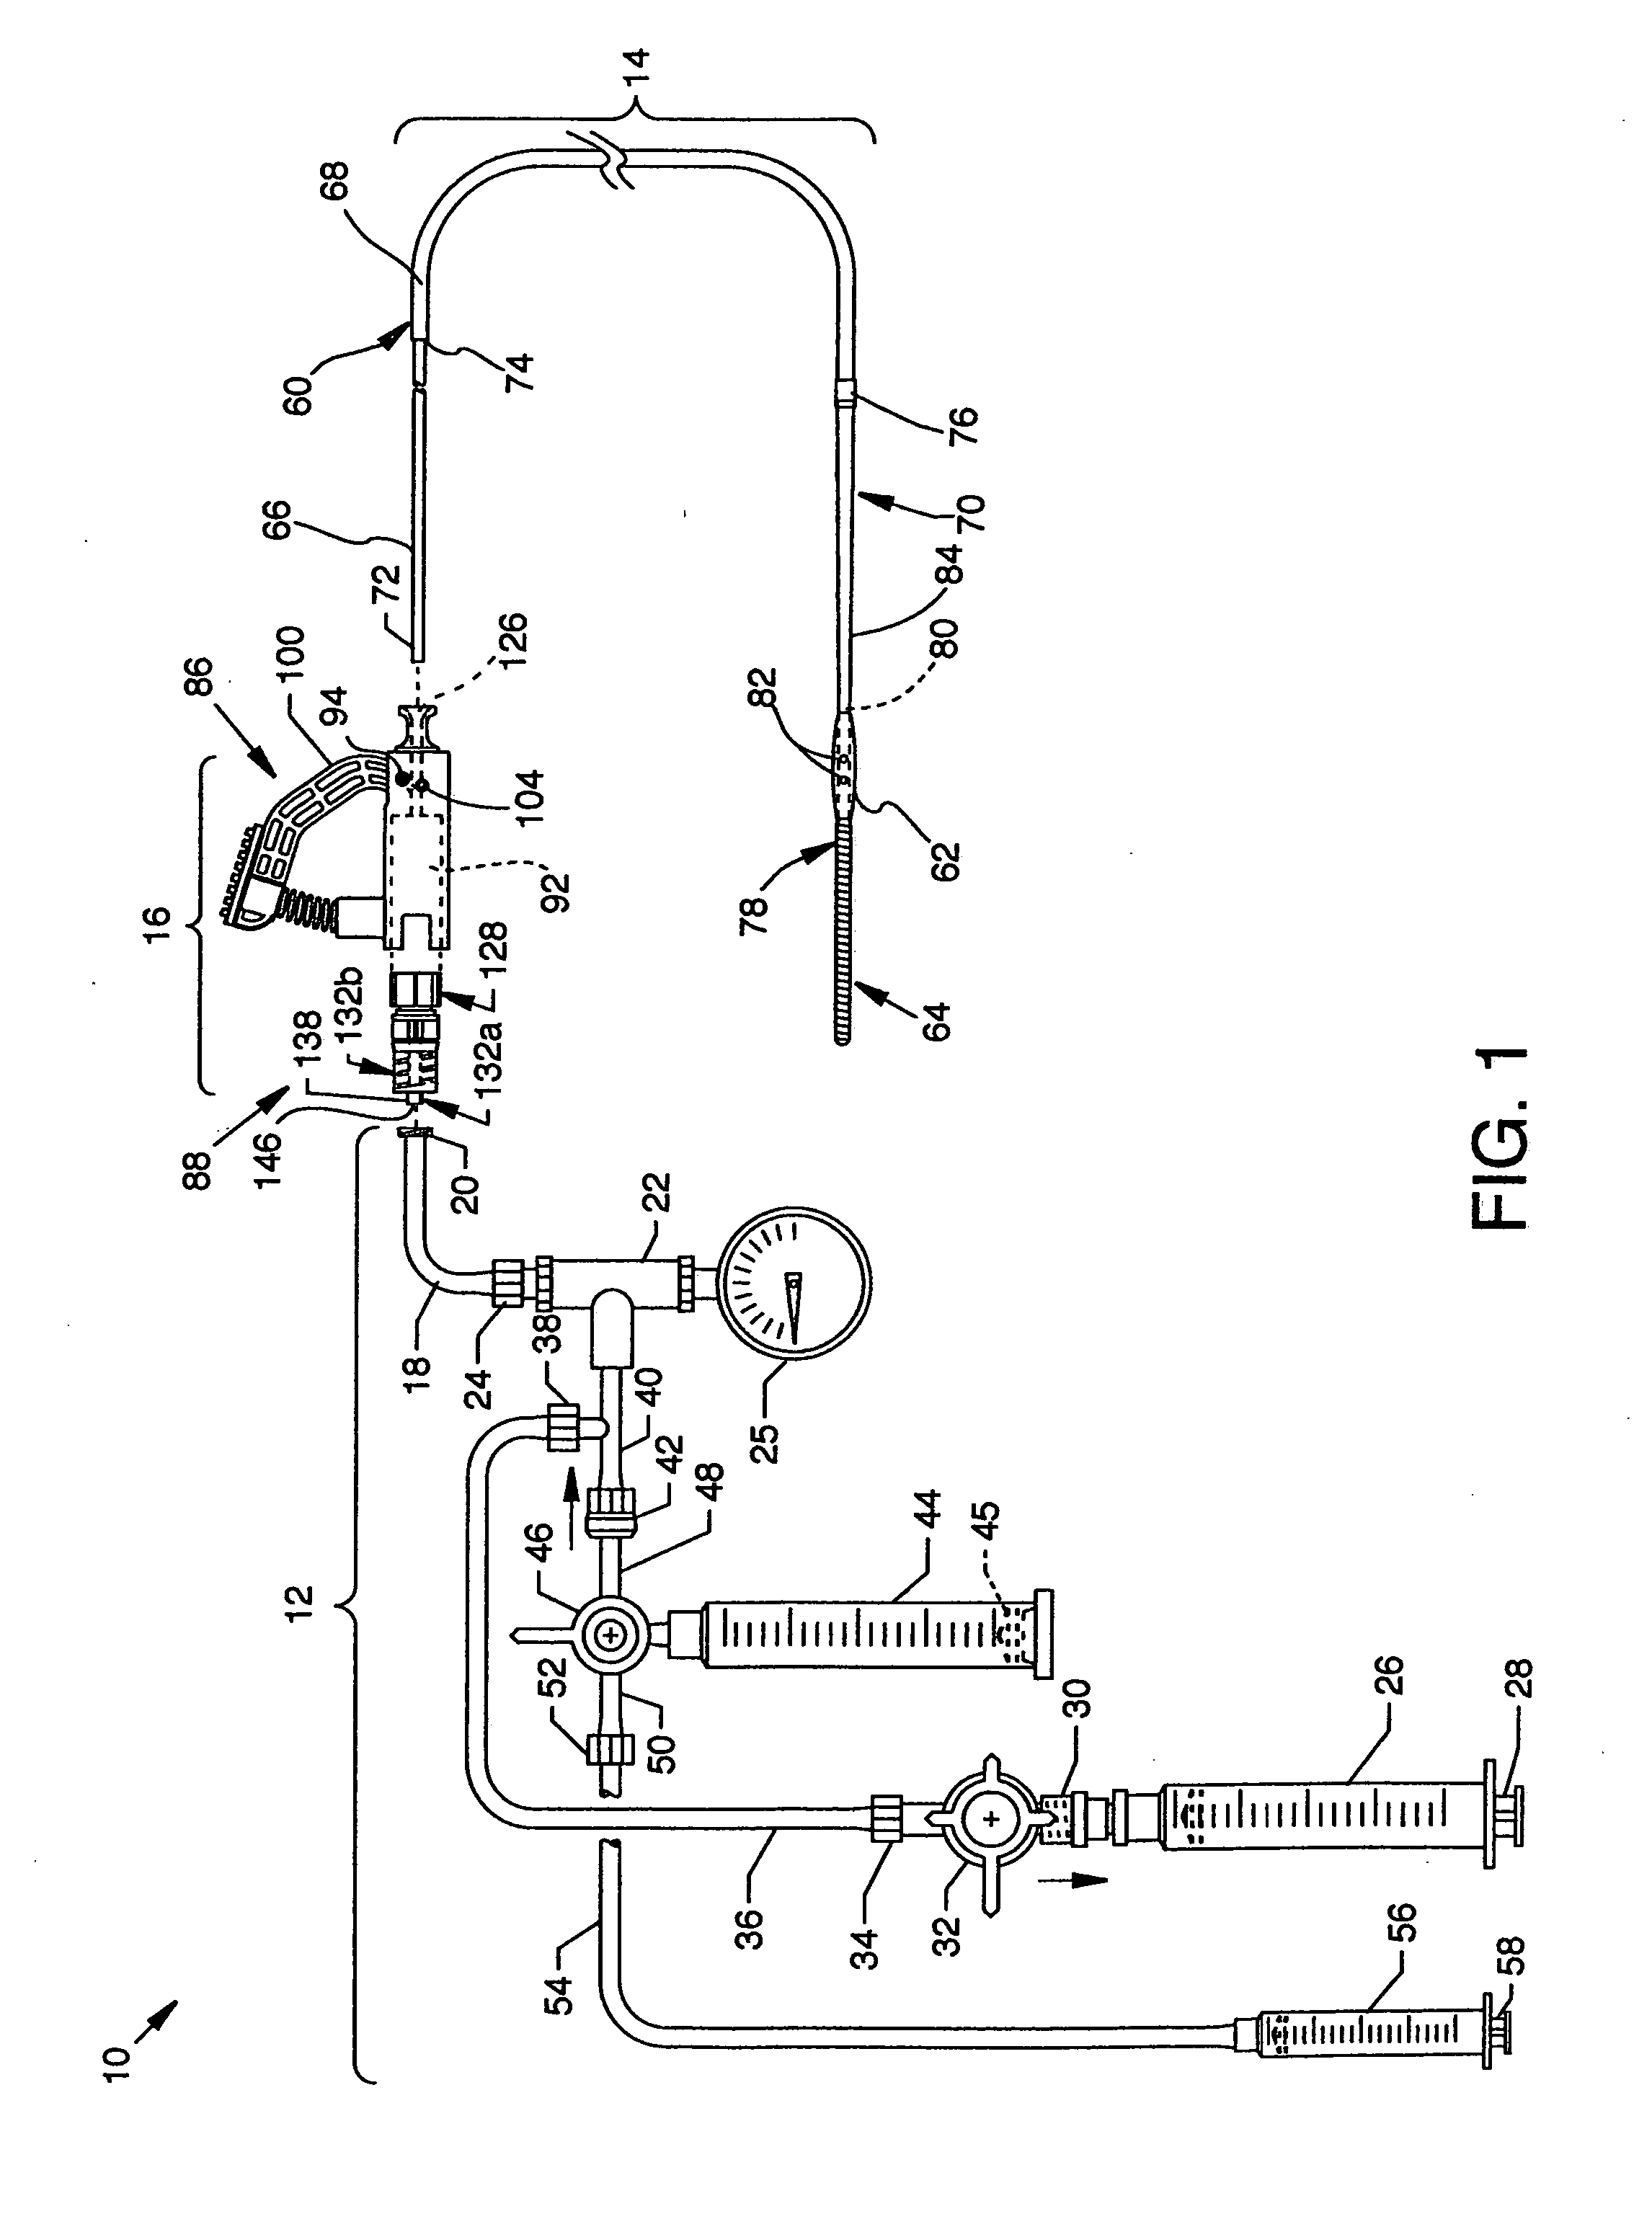 Gas inflation/evacuation system incorporating a reservoir and removably attached sealing system for a guidewire assembly having an occlusive device